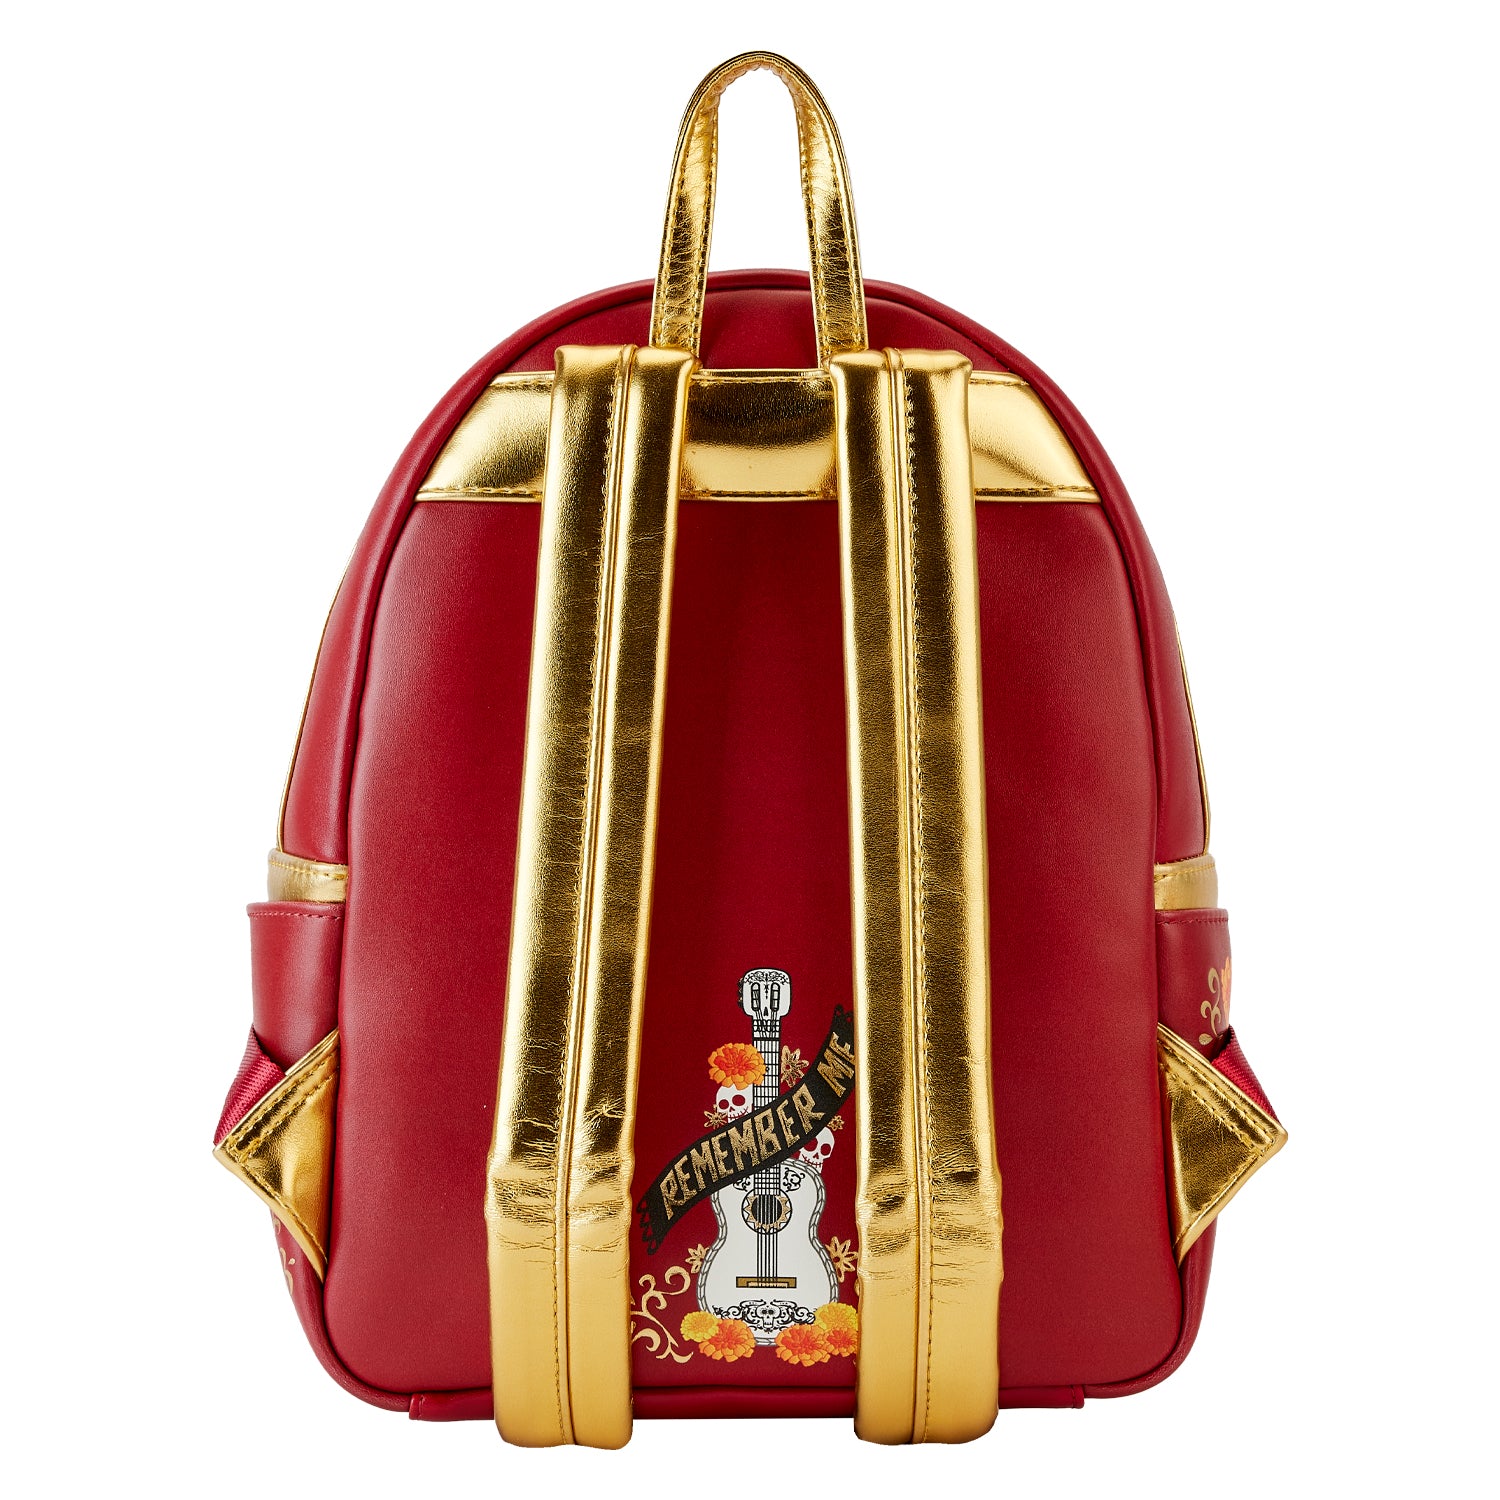 Loungefly Disney Pixar Coco Miguel Cosplay Mini Backpack - *PREORDER*